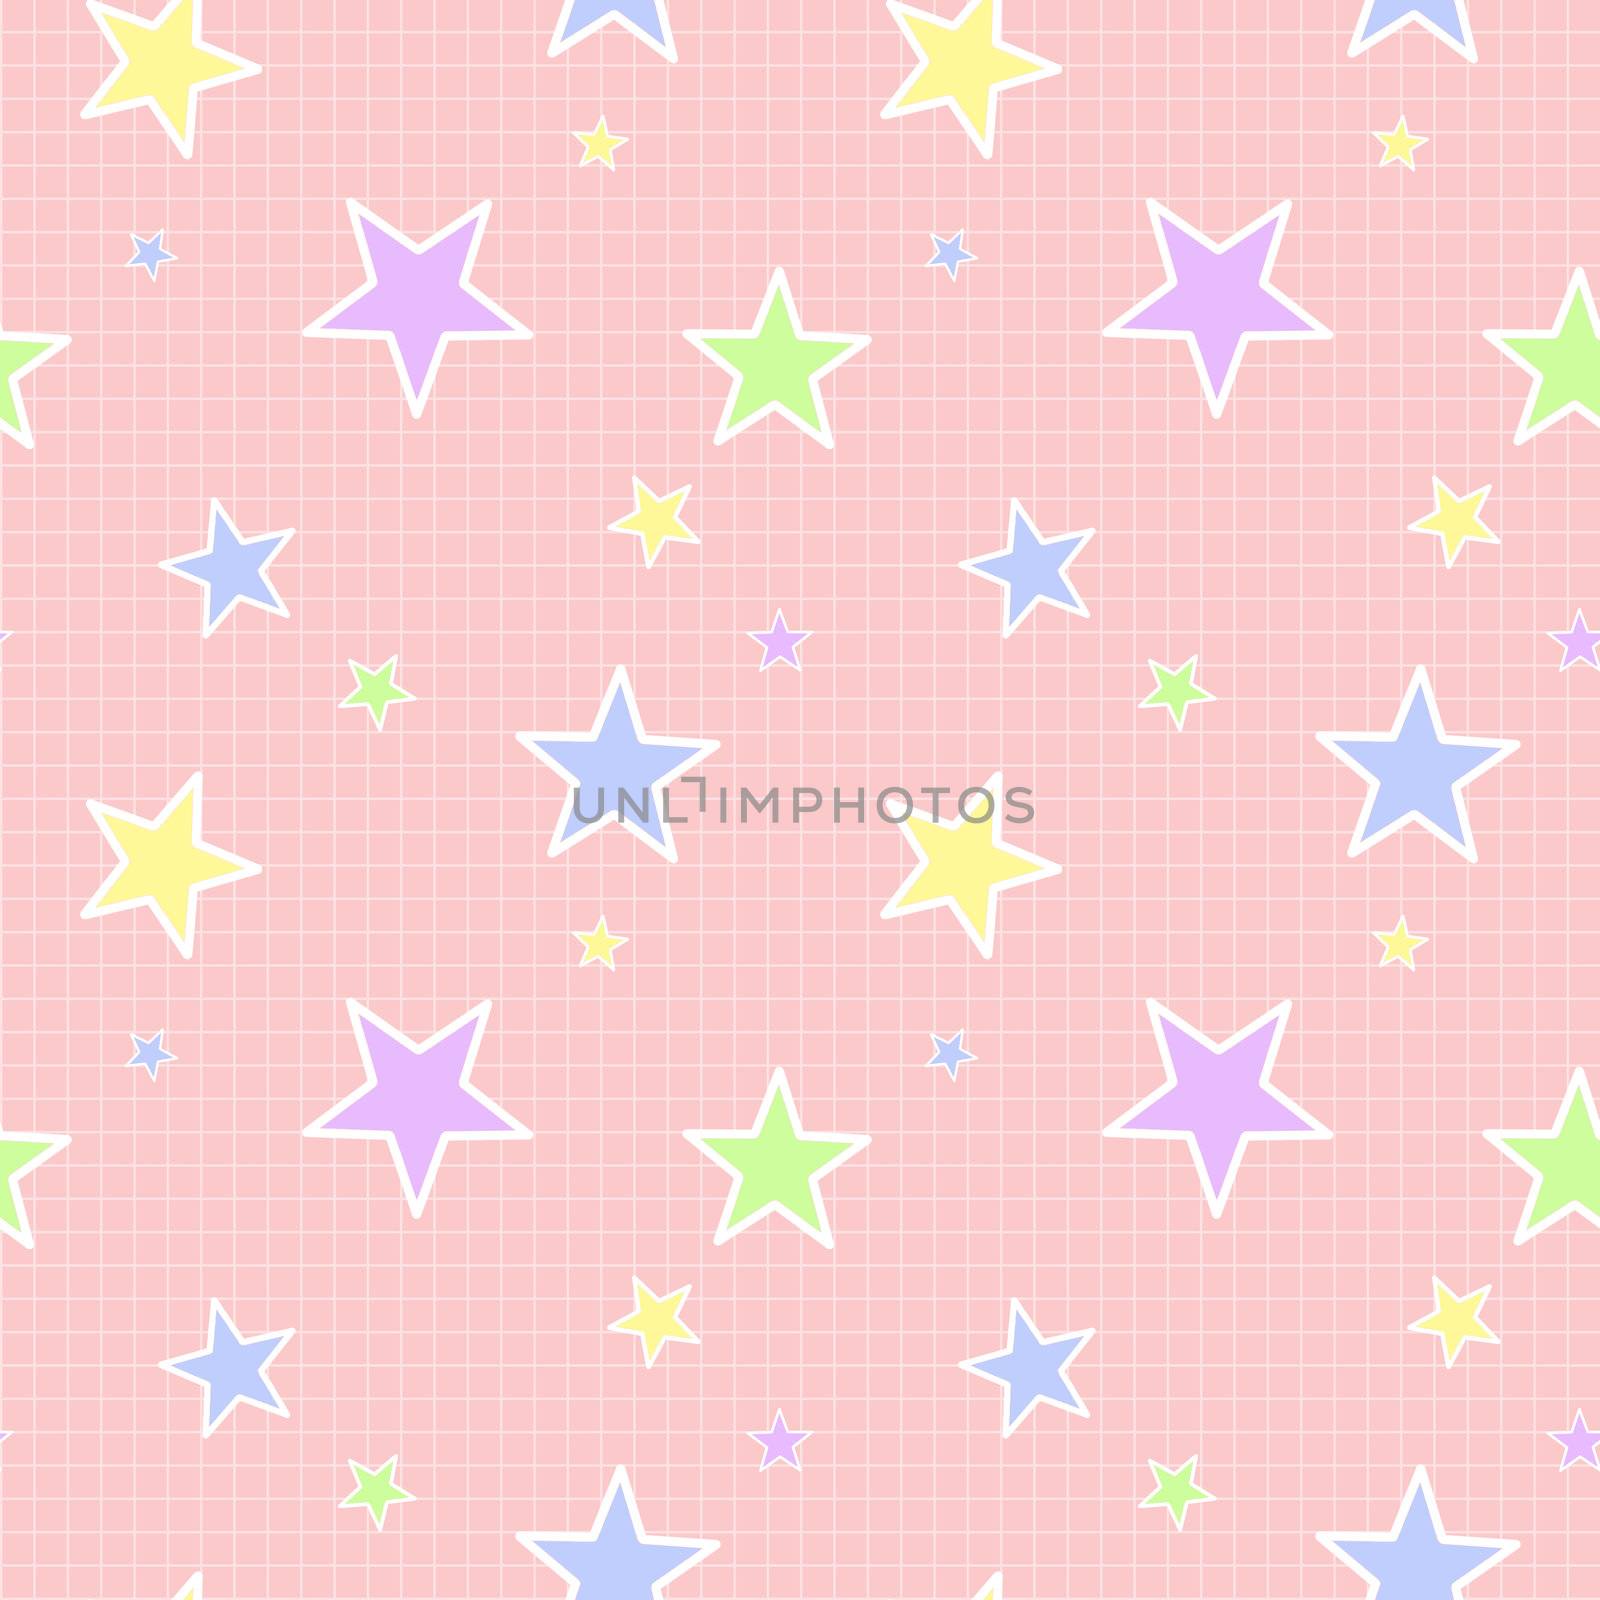 Various colors and sizes of stars on pink background with small crosshatch pattern